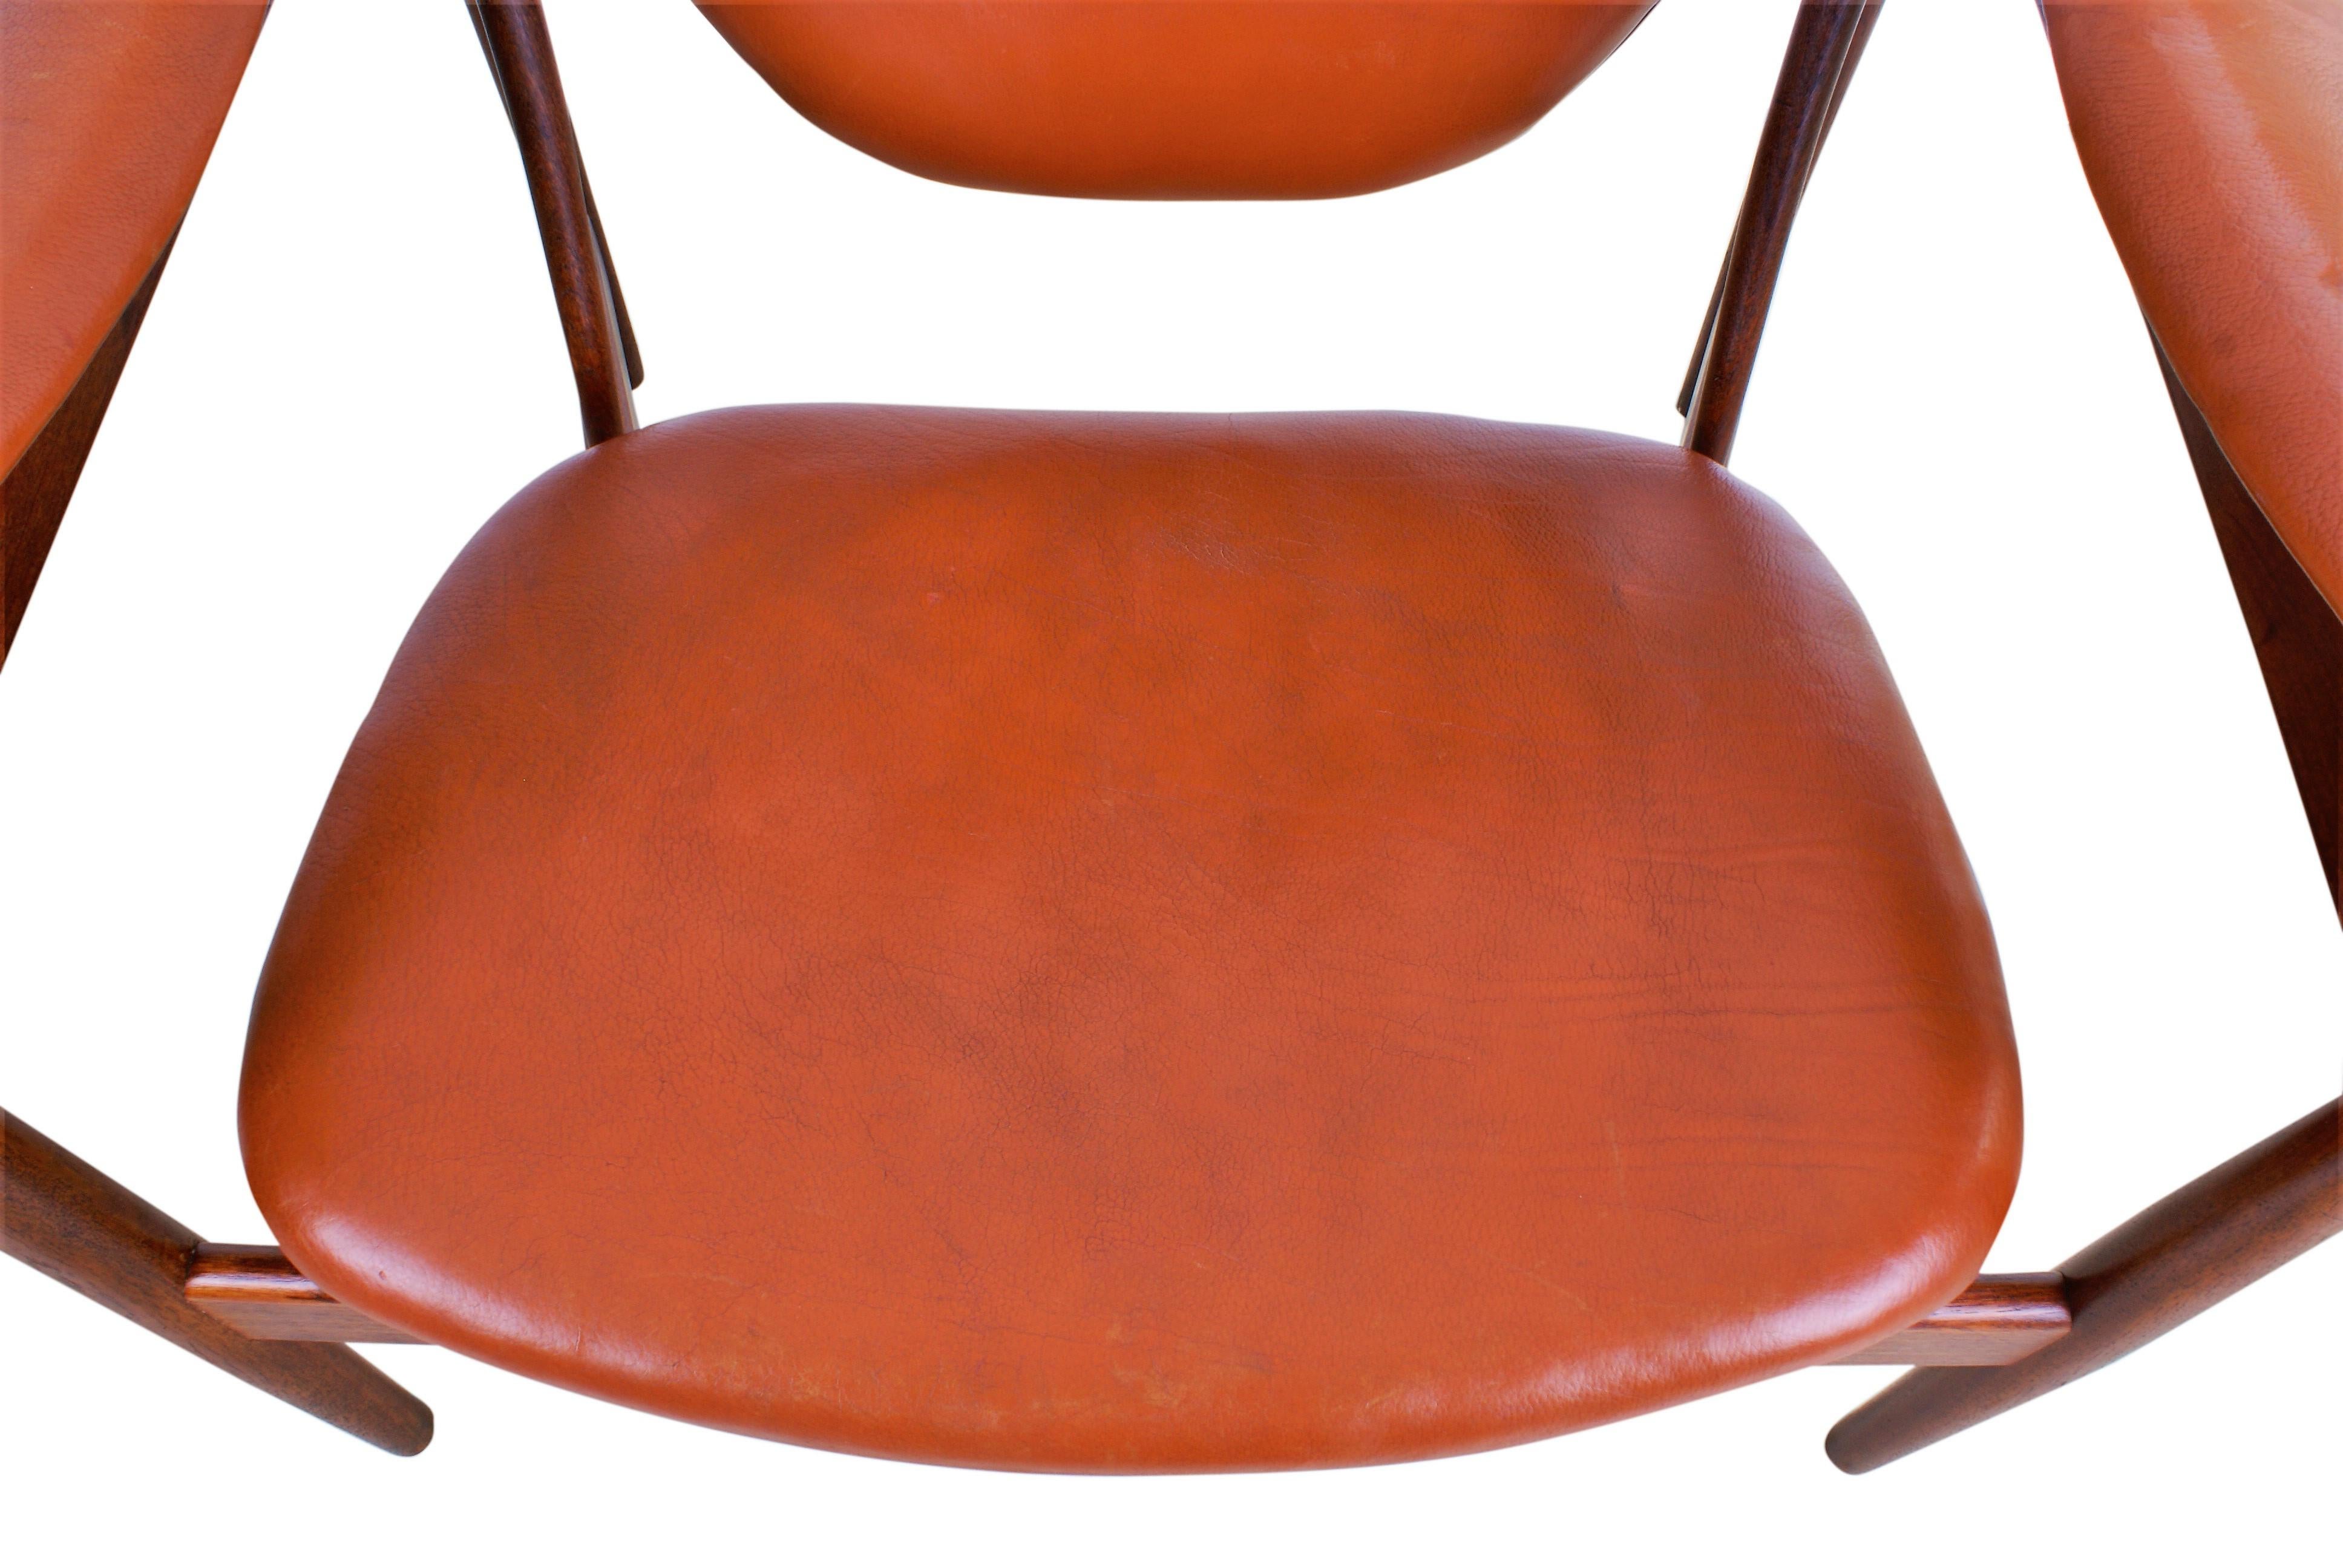 Finn Juhl Rare 'Chieftain' Chair in Teak and Leather for Niels Vodder, 1949 For Sale 5